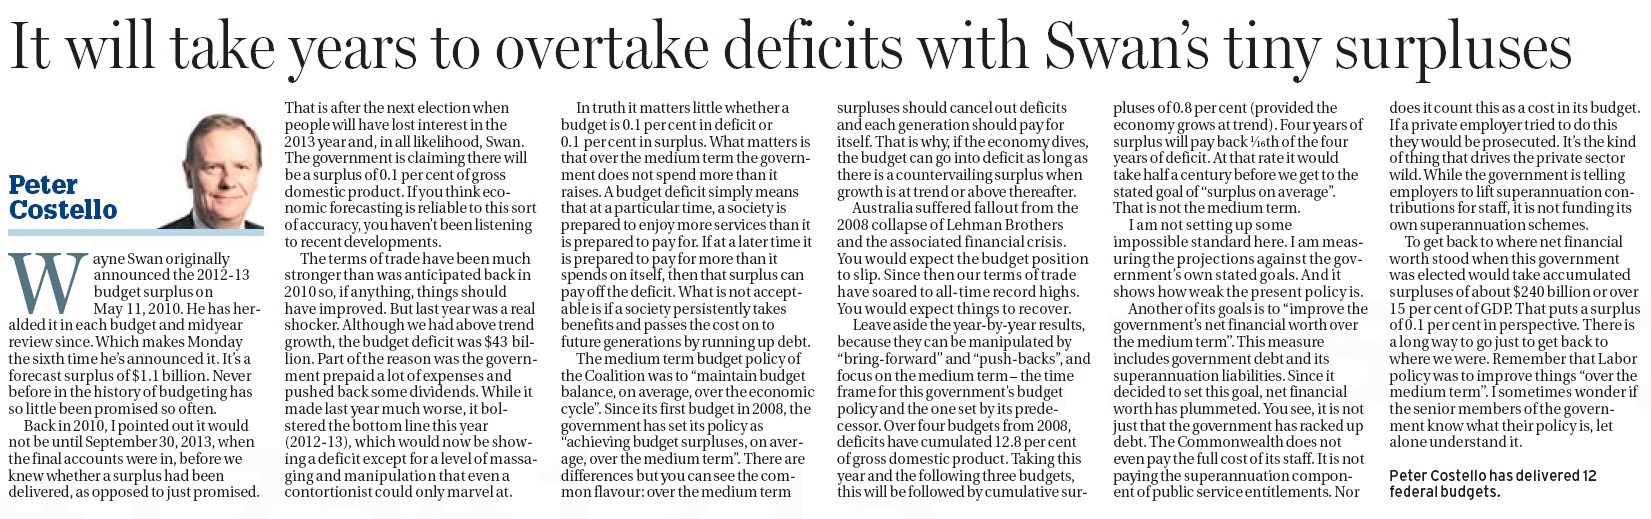 smh_-_it_will_take_years_to_overtake_deficits_with_swans_tiny_surpluses_-_24_october_2012jpg